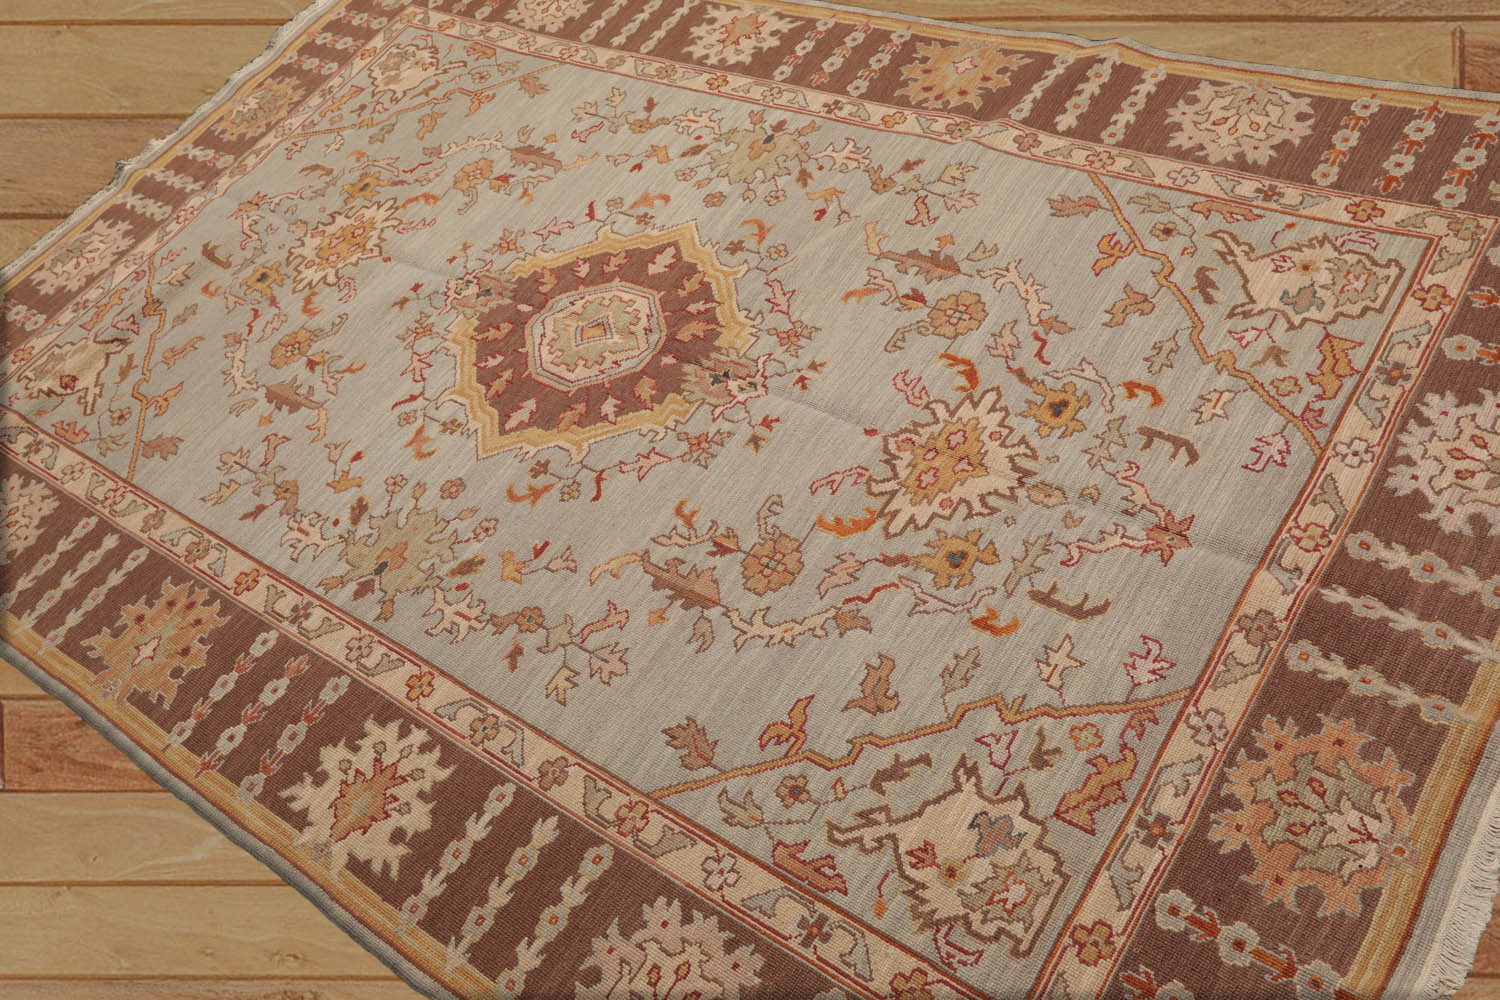 Yerby 6x9 Hand Knotted Sino Persian 100% Wool Nourison Nourmak Traditional Oriental Area Rug Moss, Brown Color